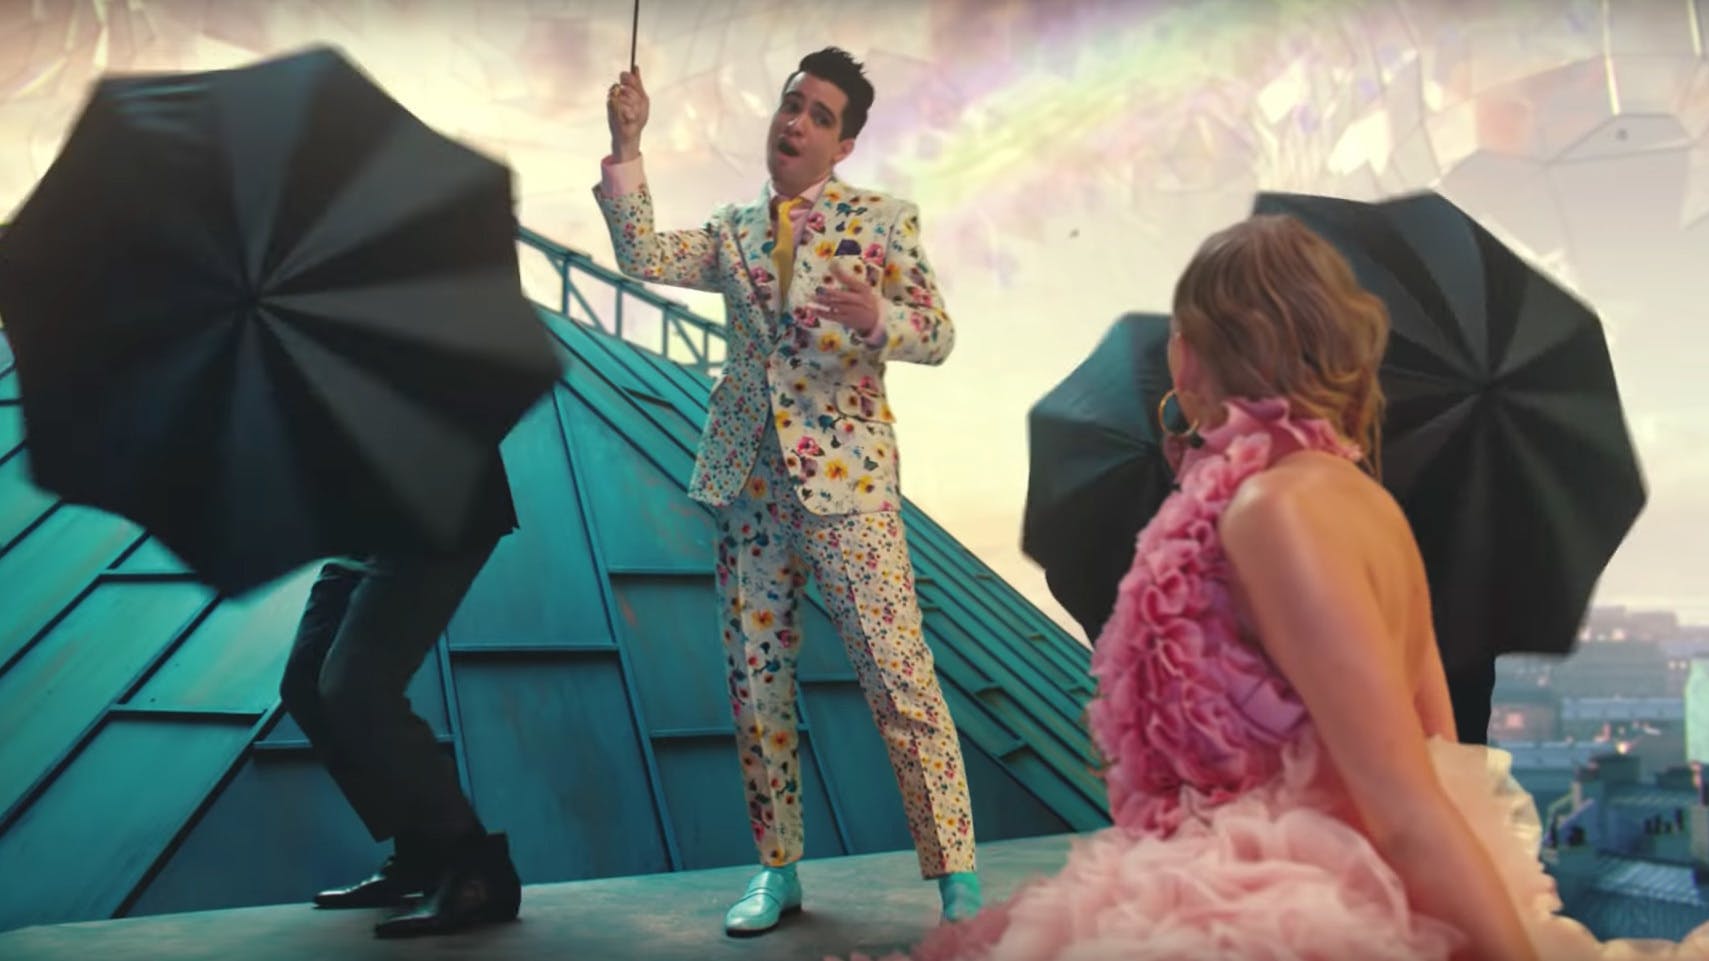 Brendon Urie Releases New Song With Taylor Swift